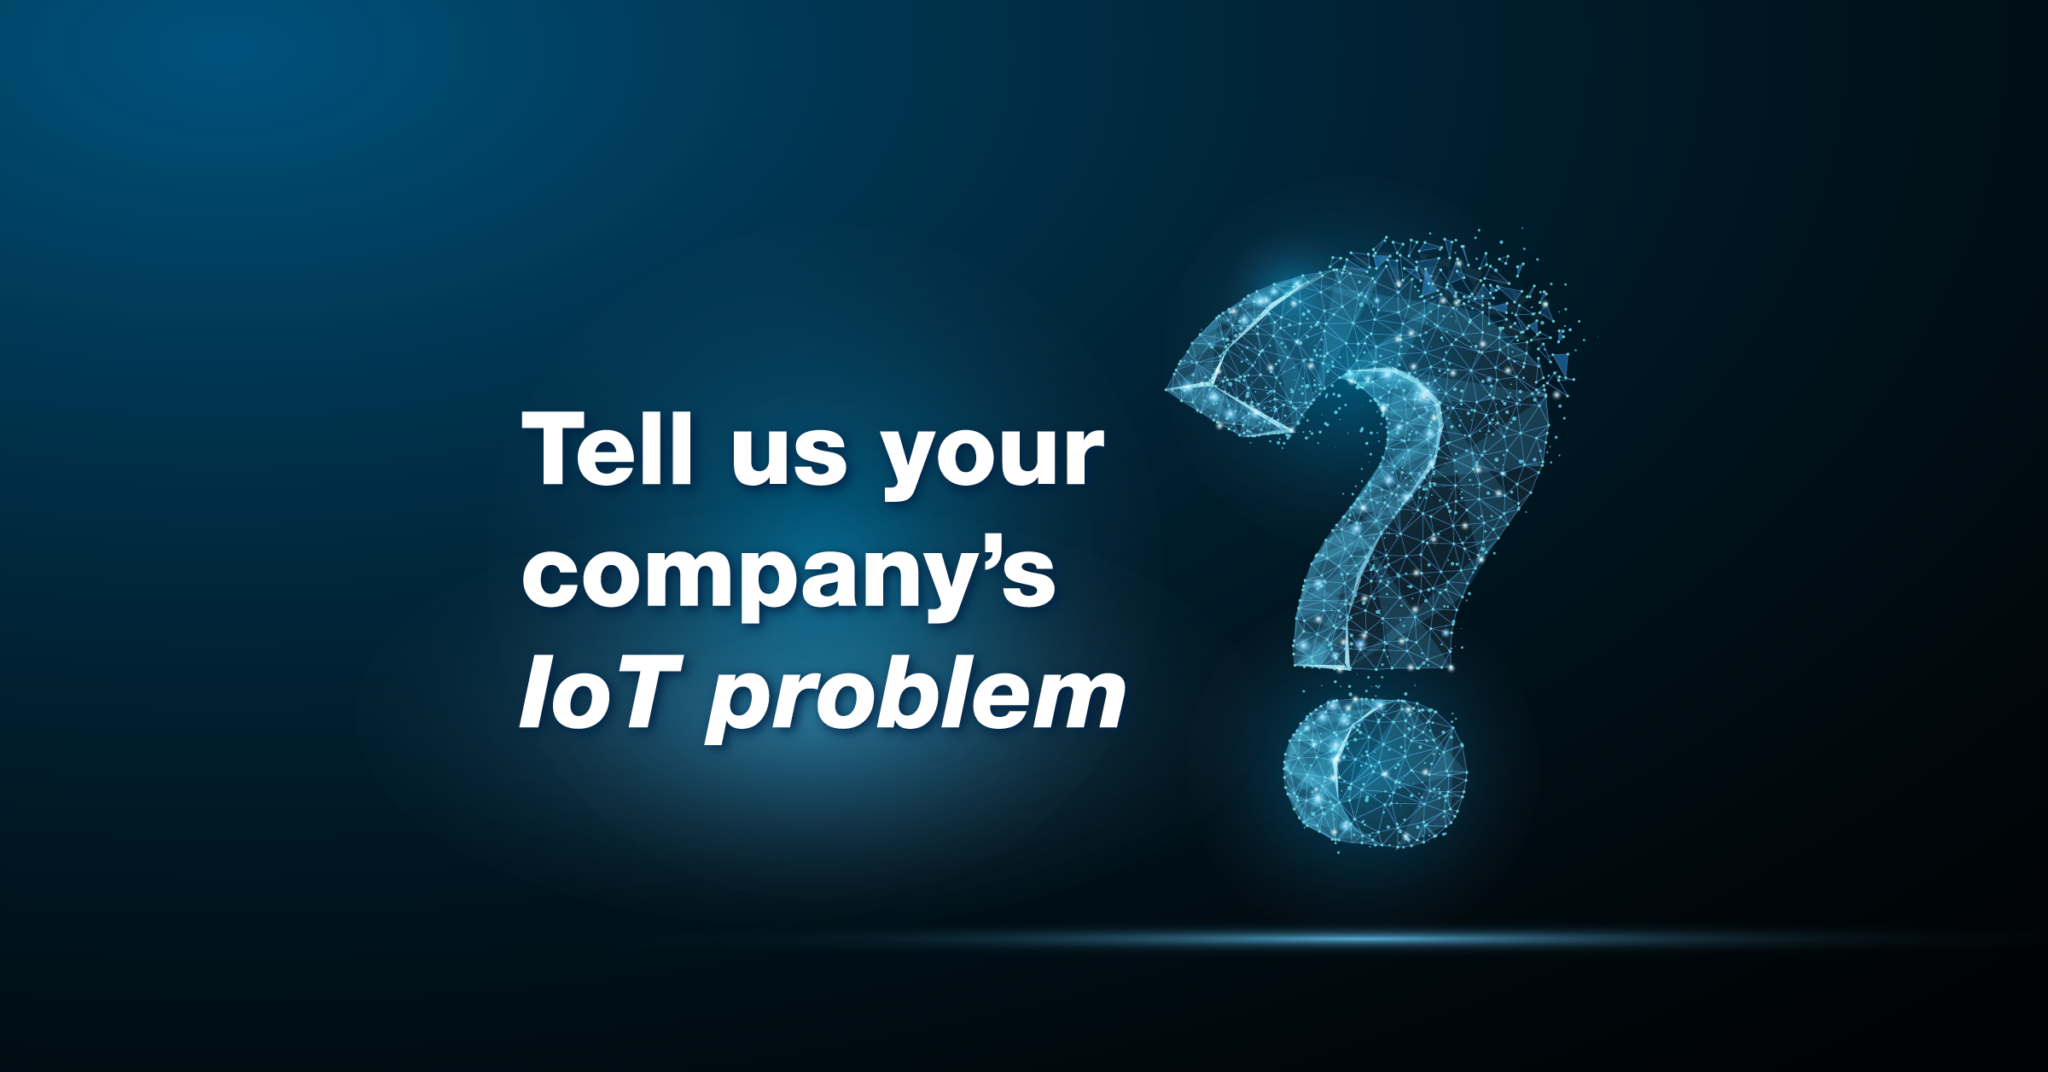 Tell us your company's IoT problem